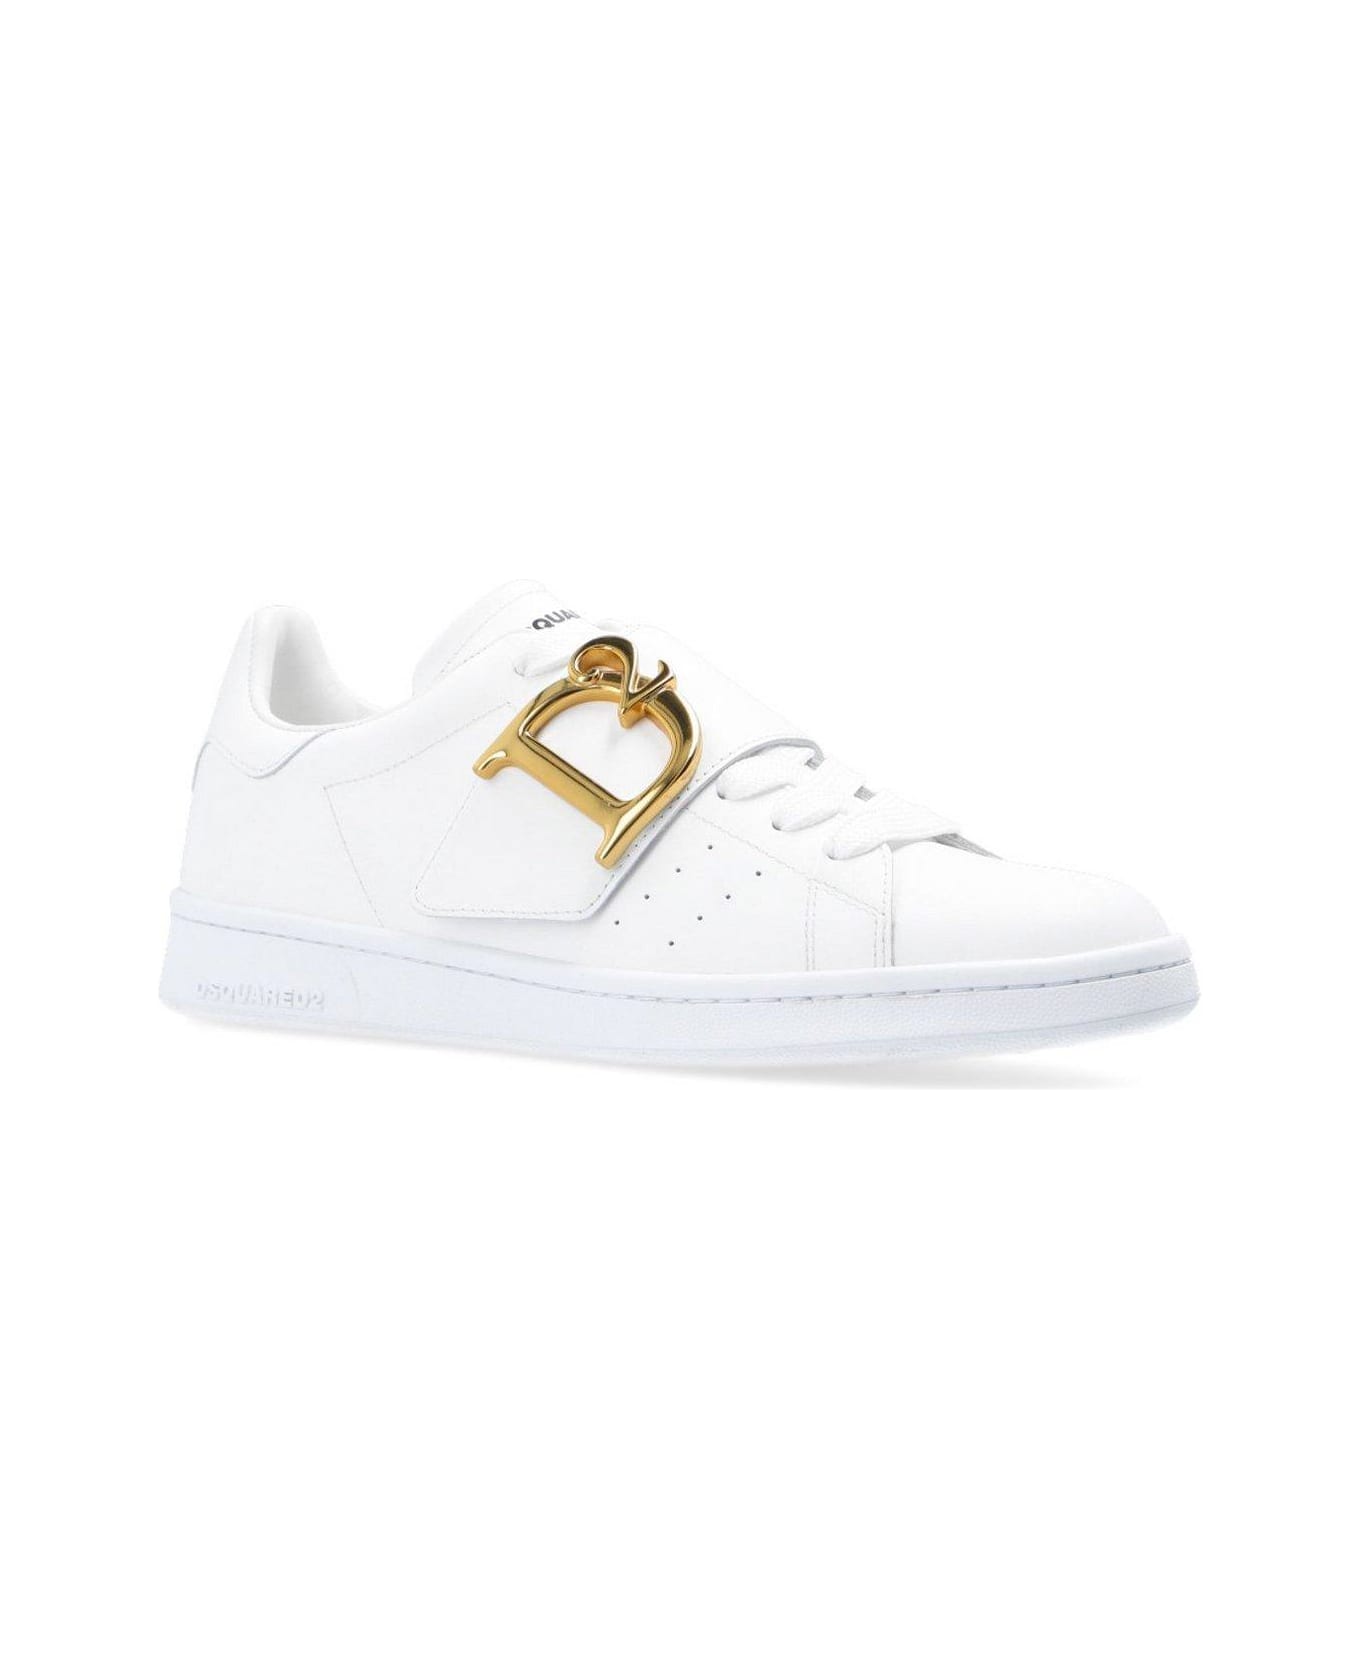 Dsquared2 Logo-plaque Round Toe Sneakers - White スニーカー